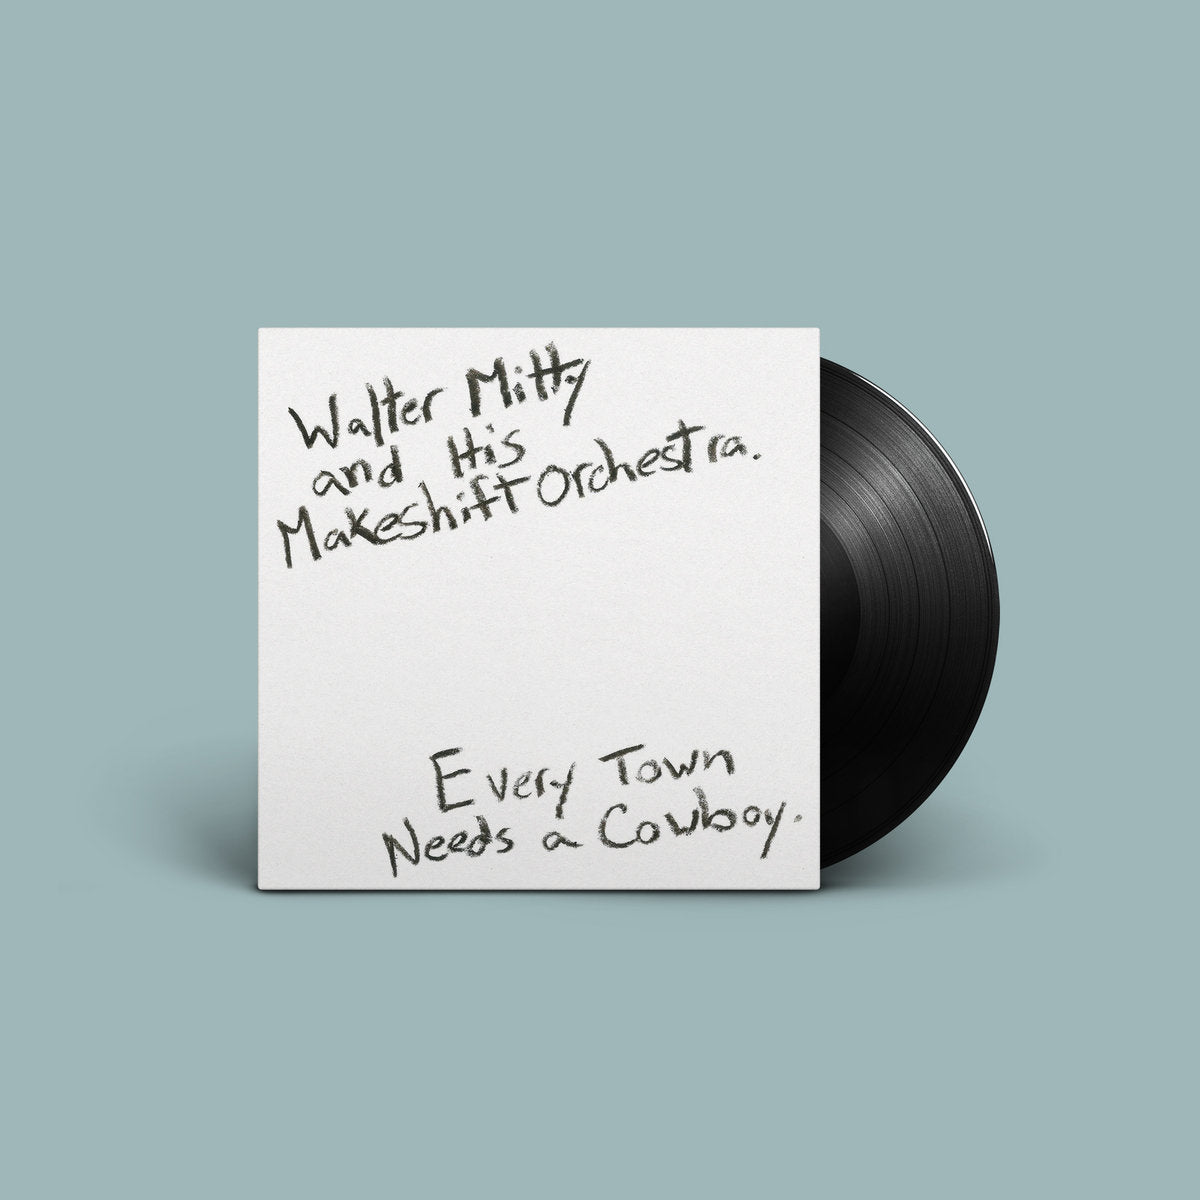 Walter Mitty & His Makeshift Orchestra - "Every Town Needs A Cowboy"